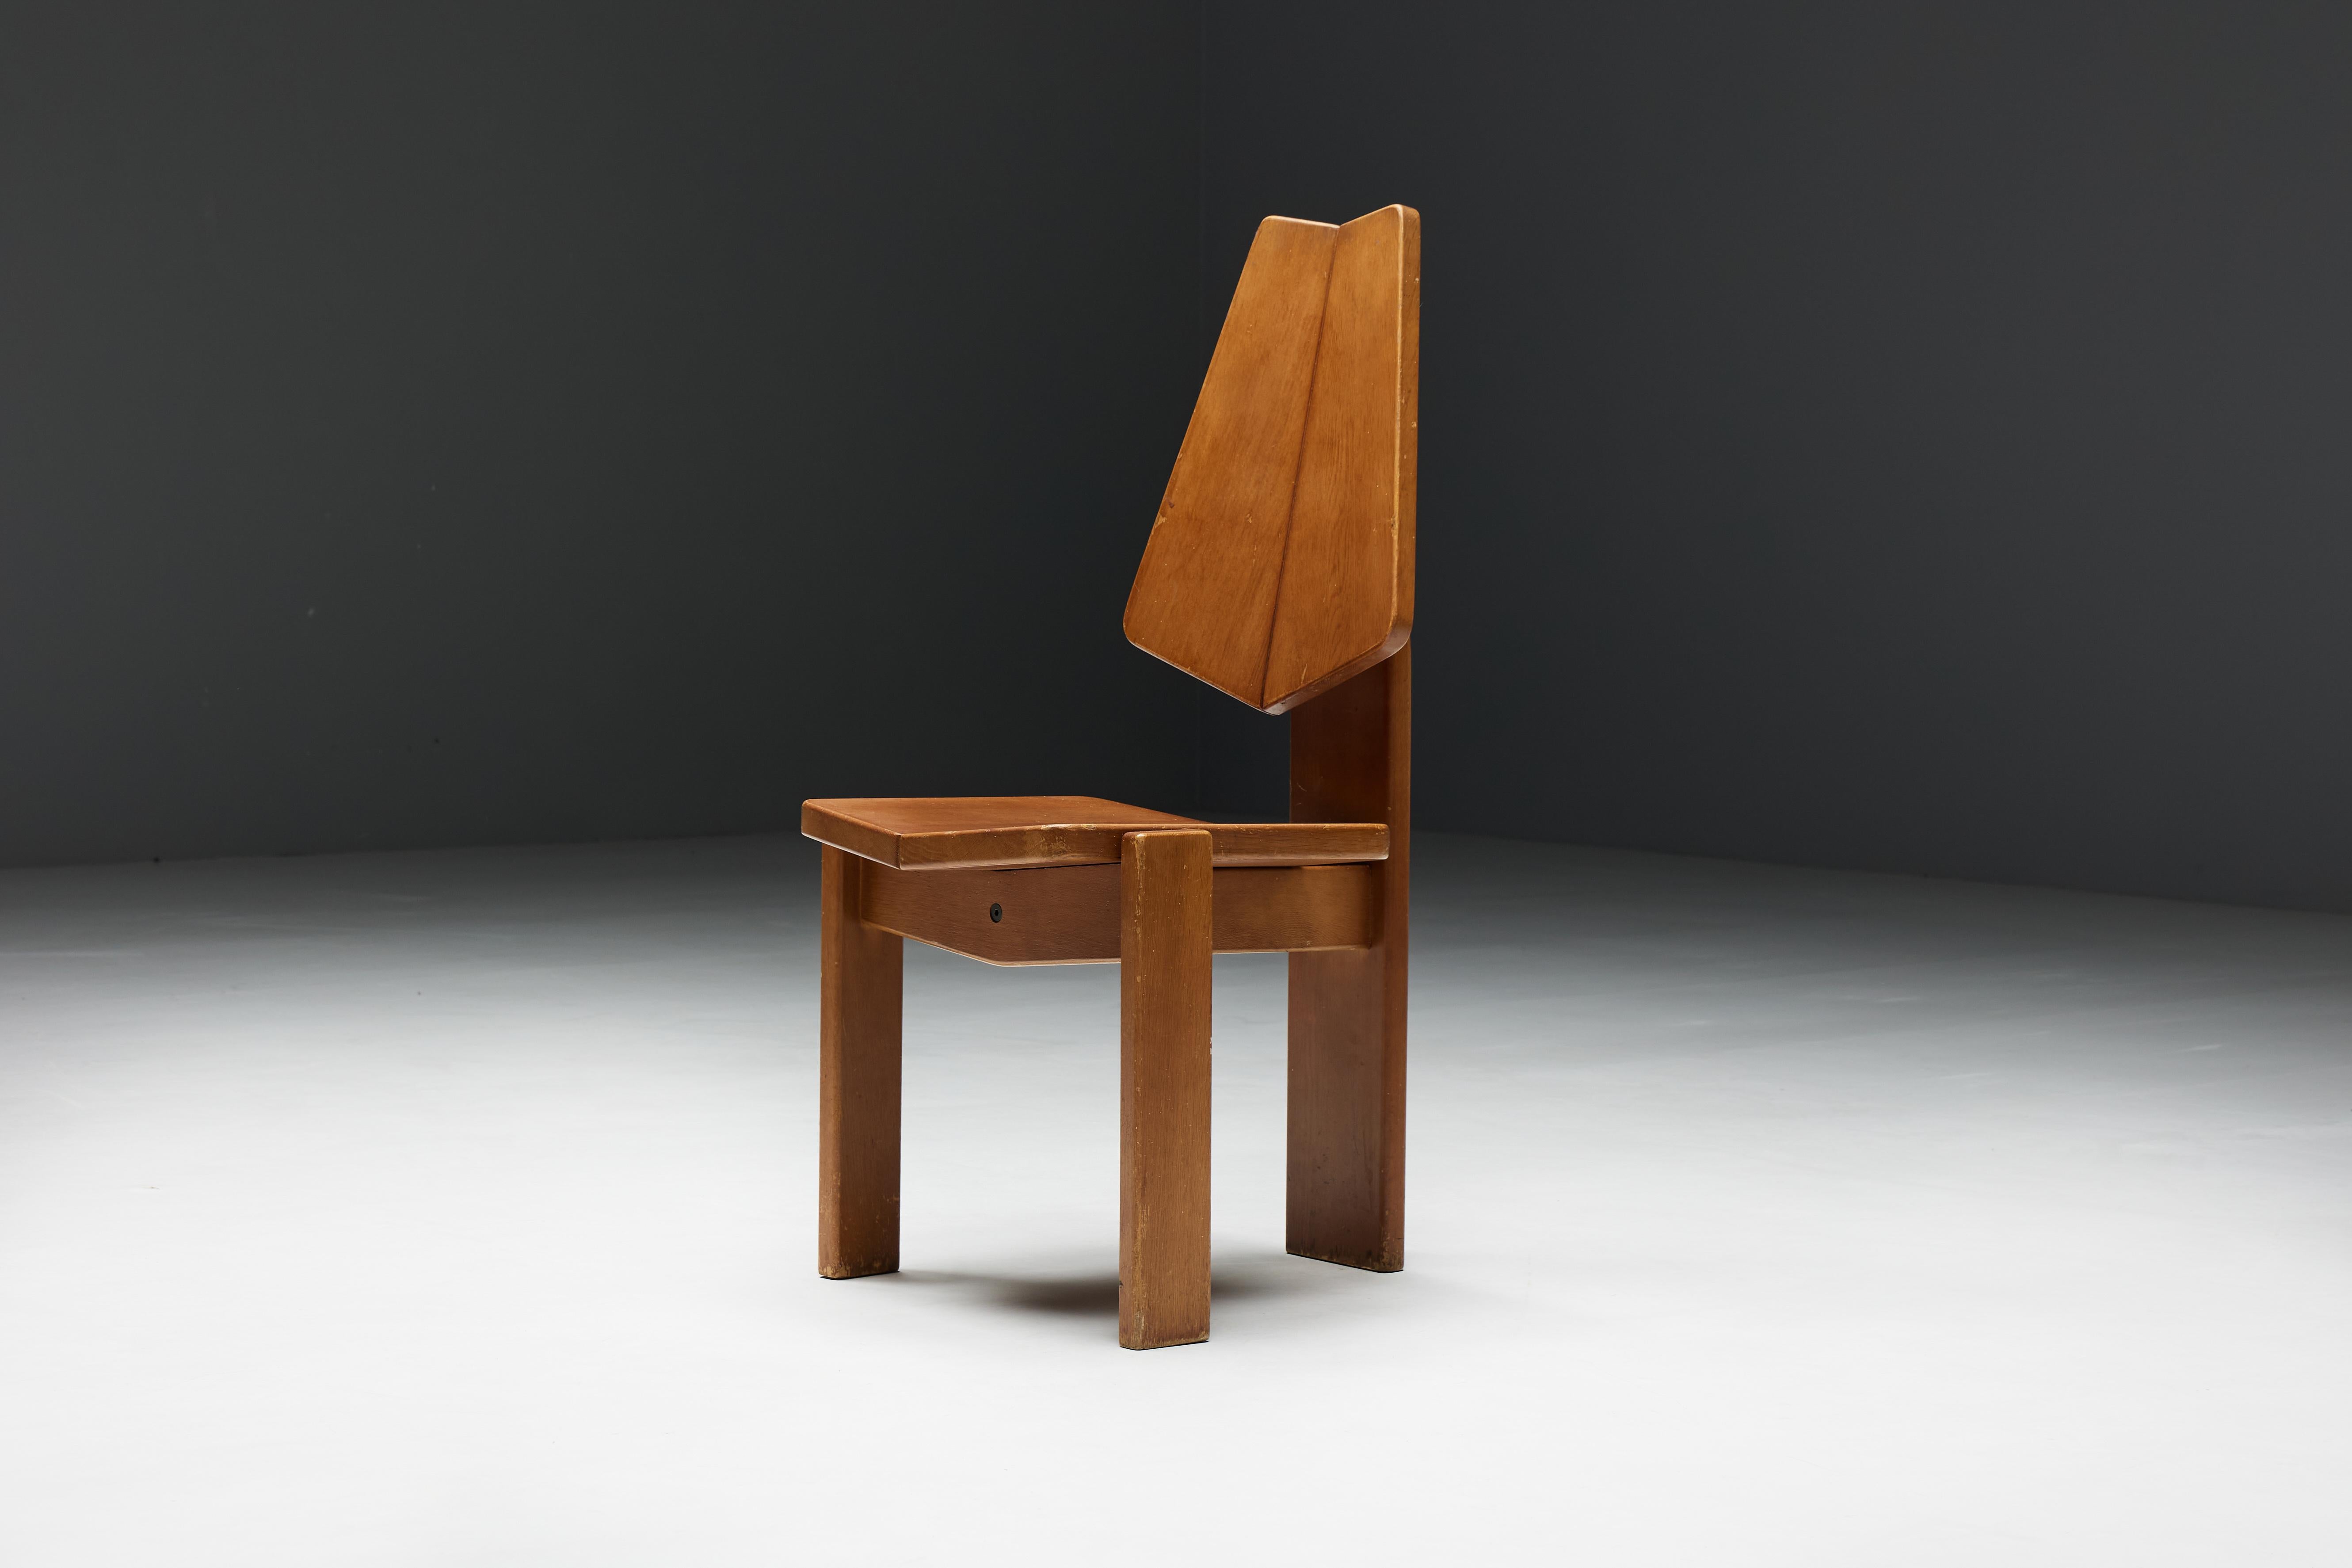 Brutalist Wooden Dining Chairs, Belgium, 1970s For Sale 6